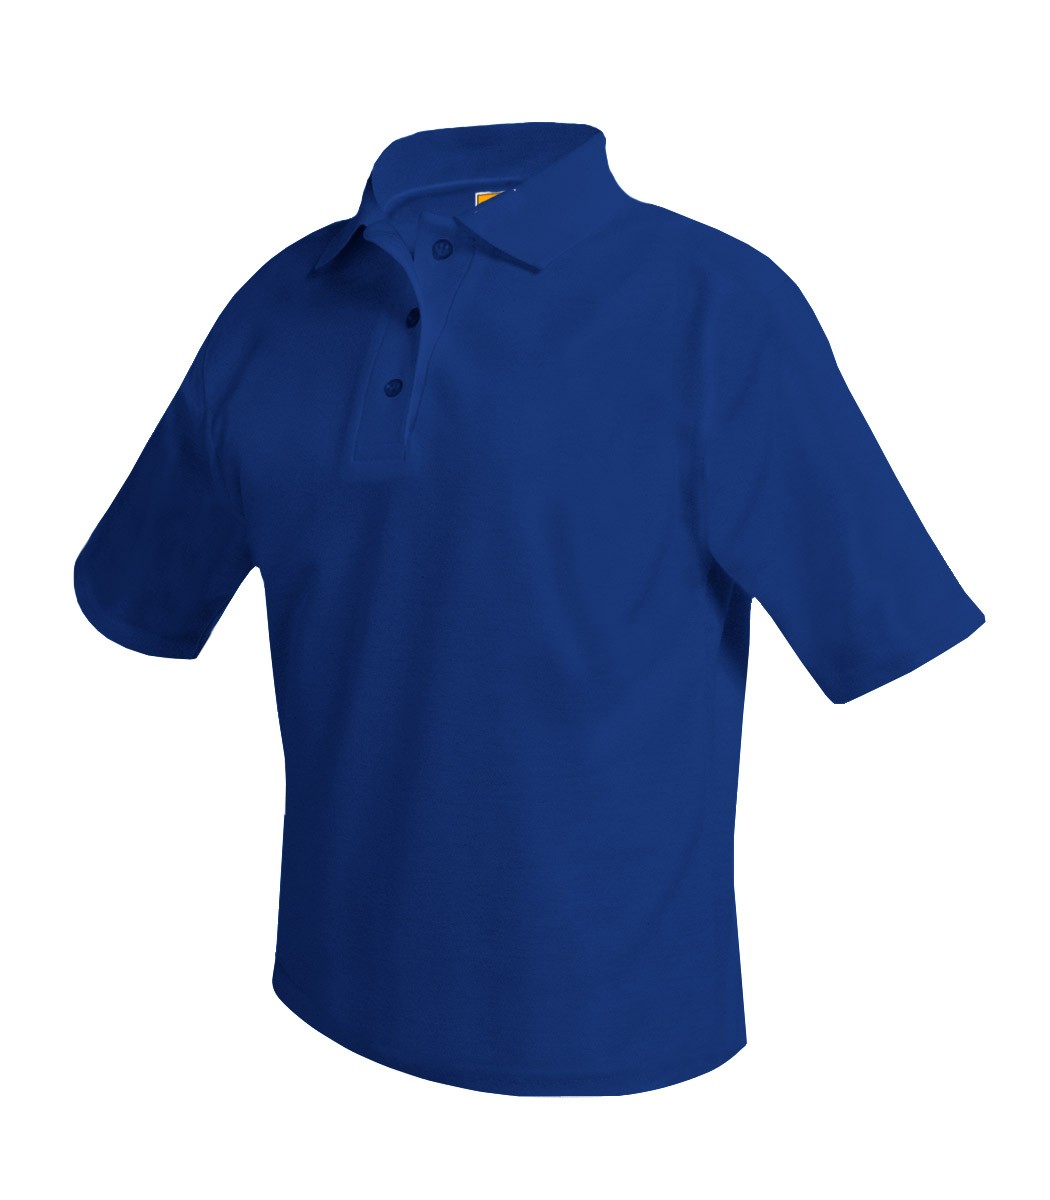 ST. PETER FACULTY STORE Royal S/S Polo w/ Logo